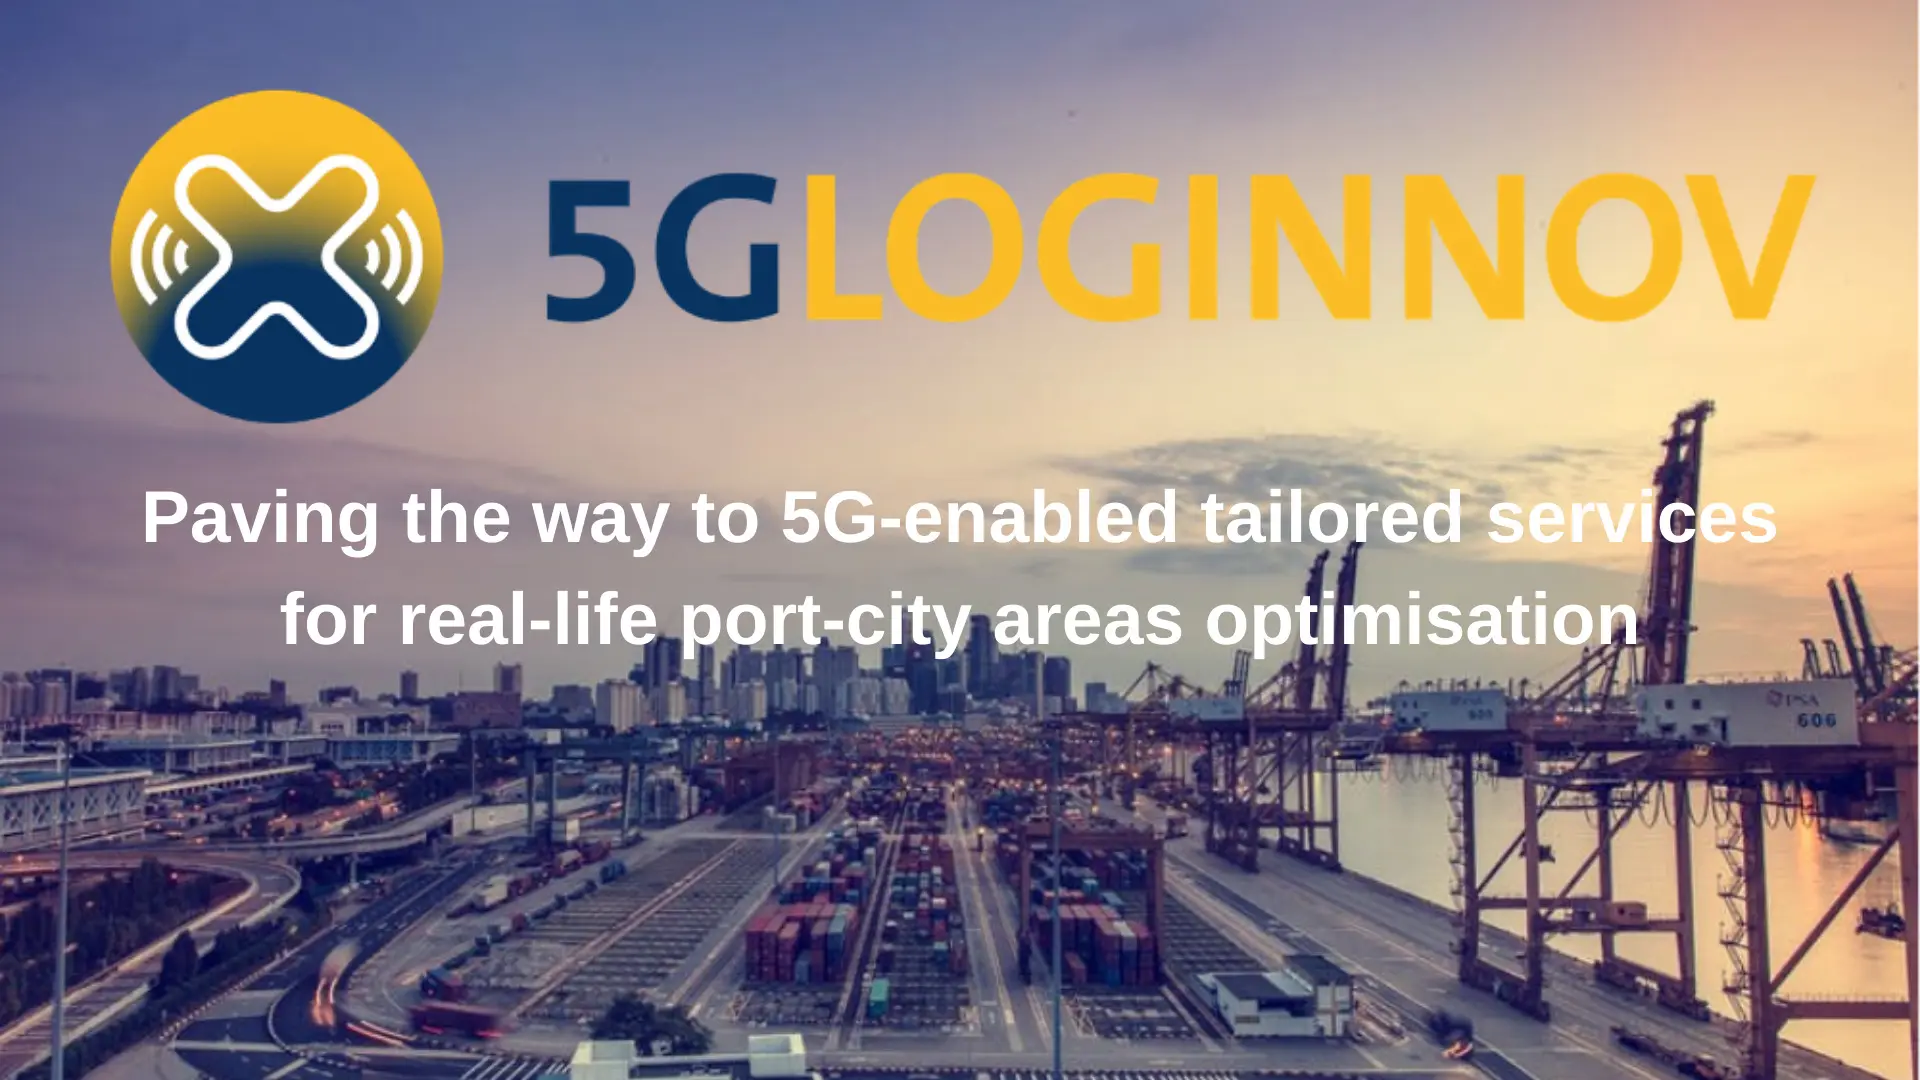 Vicomtech participates in the 5G Loginnov project, based on innovation in logistics and ports through 5G technologies.